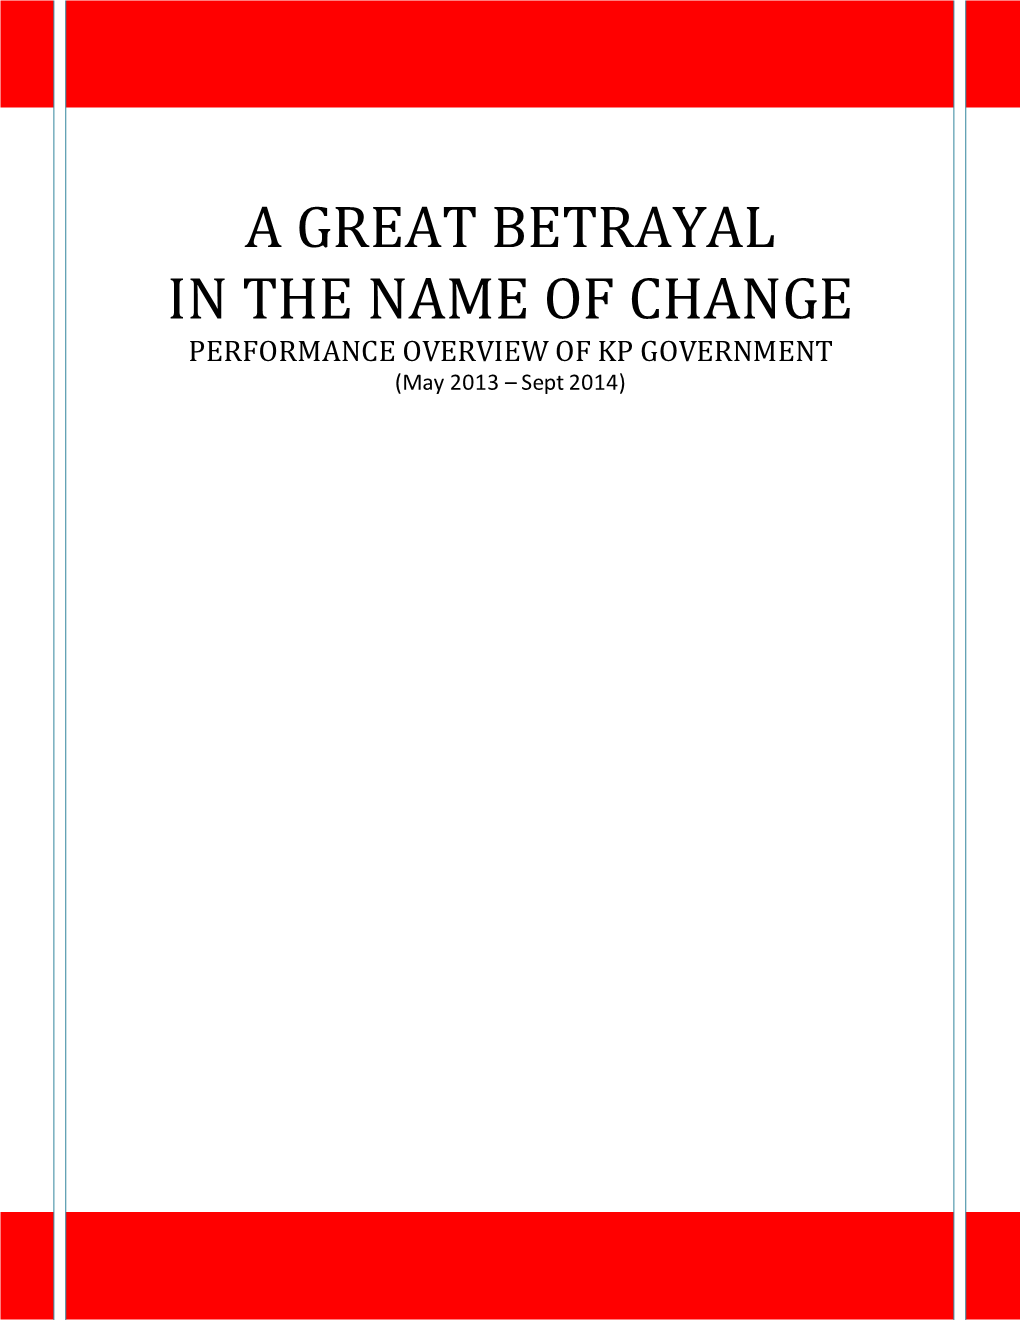 A GREAT BETRAYAL in the NAME of CHANGE PERFORMANCE OVERVIEW of KP GOVERNMENT (May 2013 – Sept 2014)